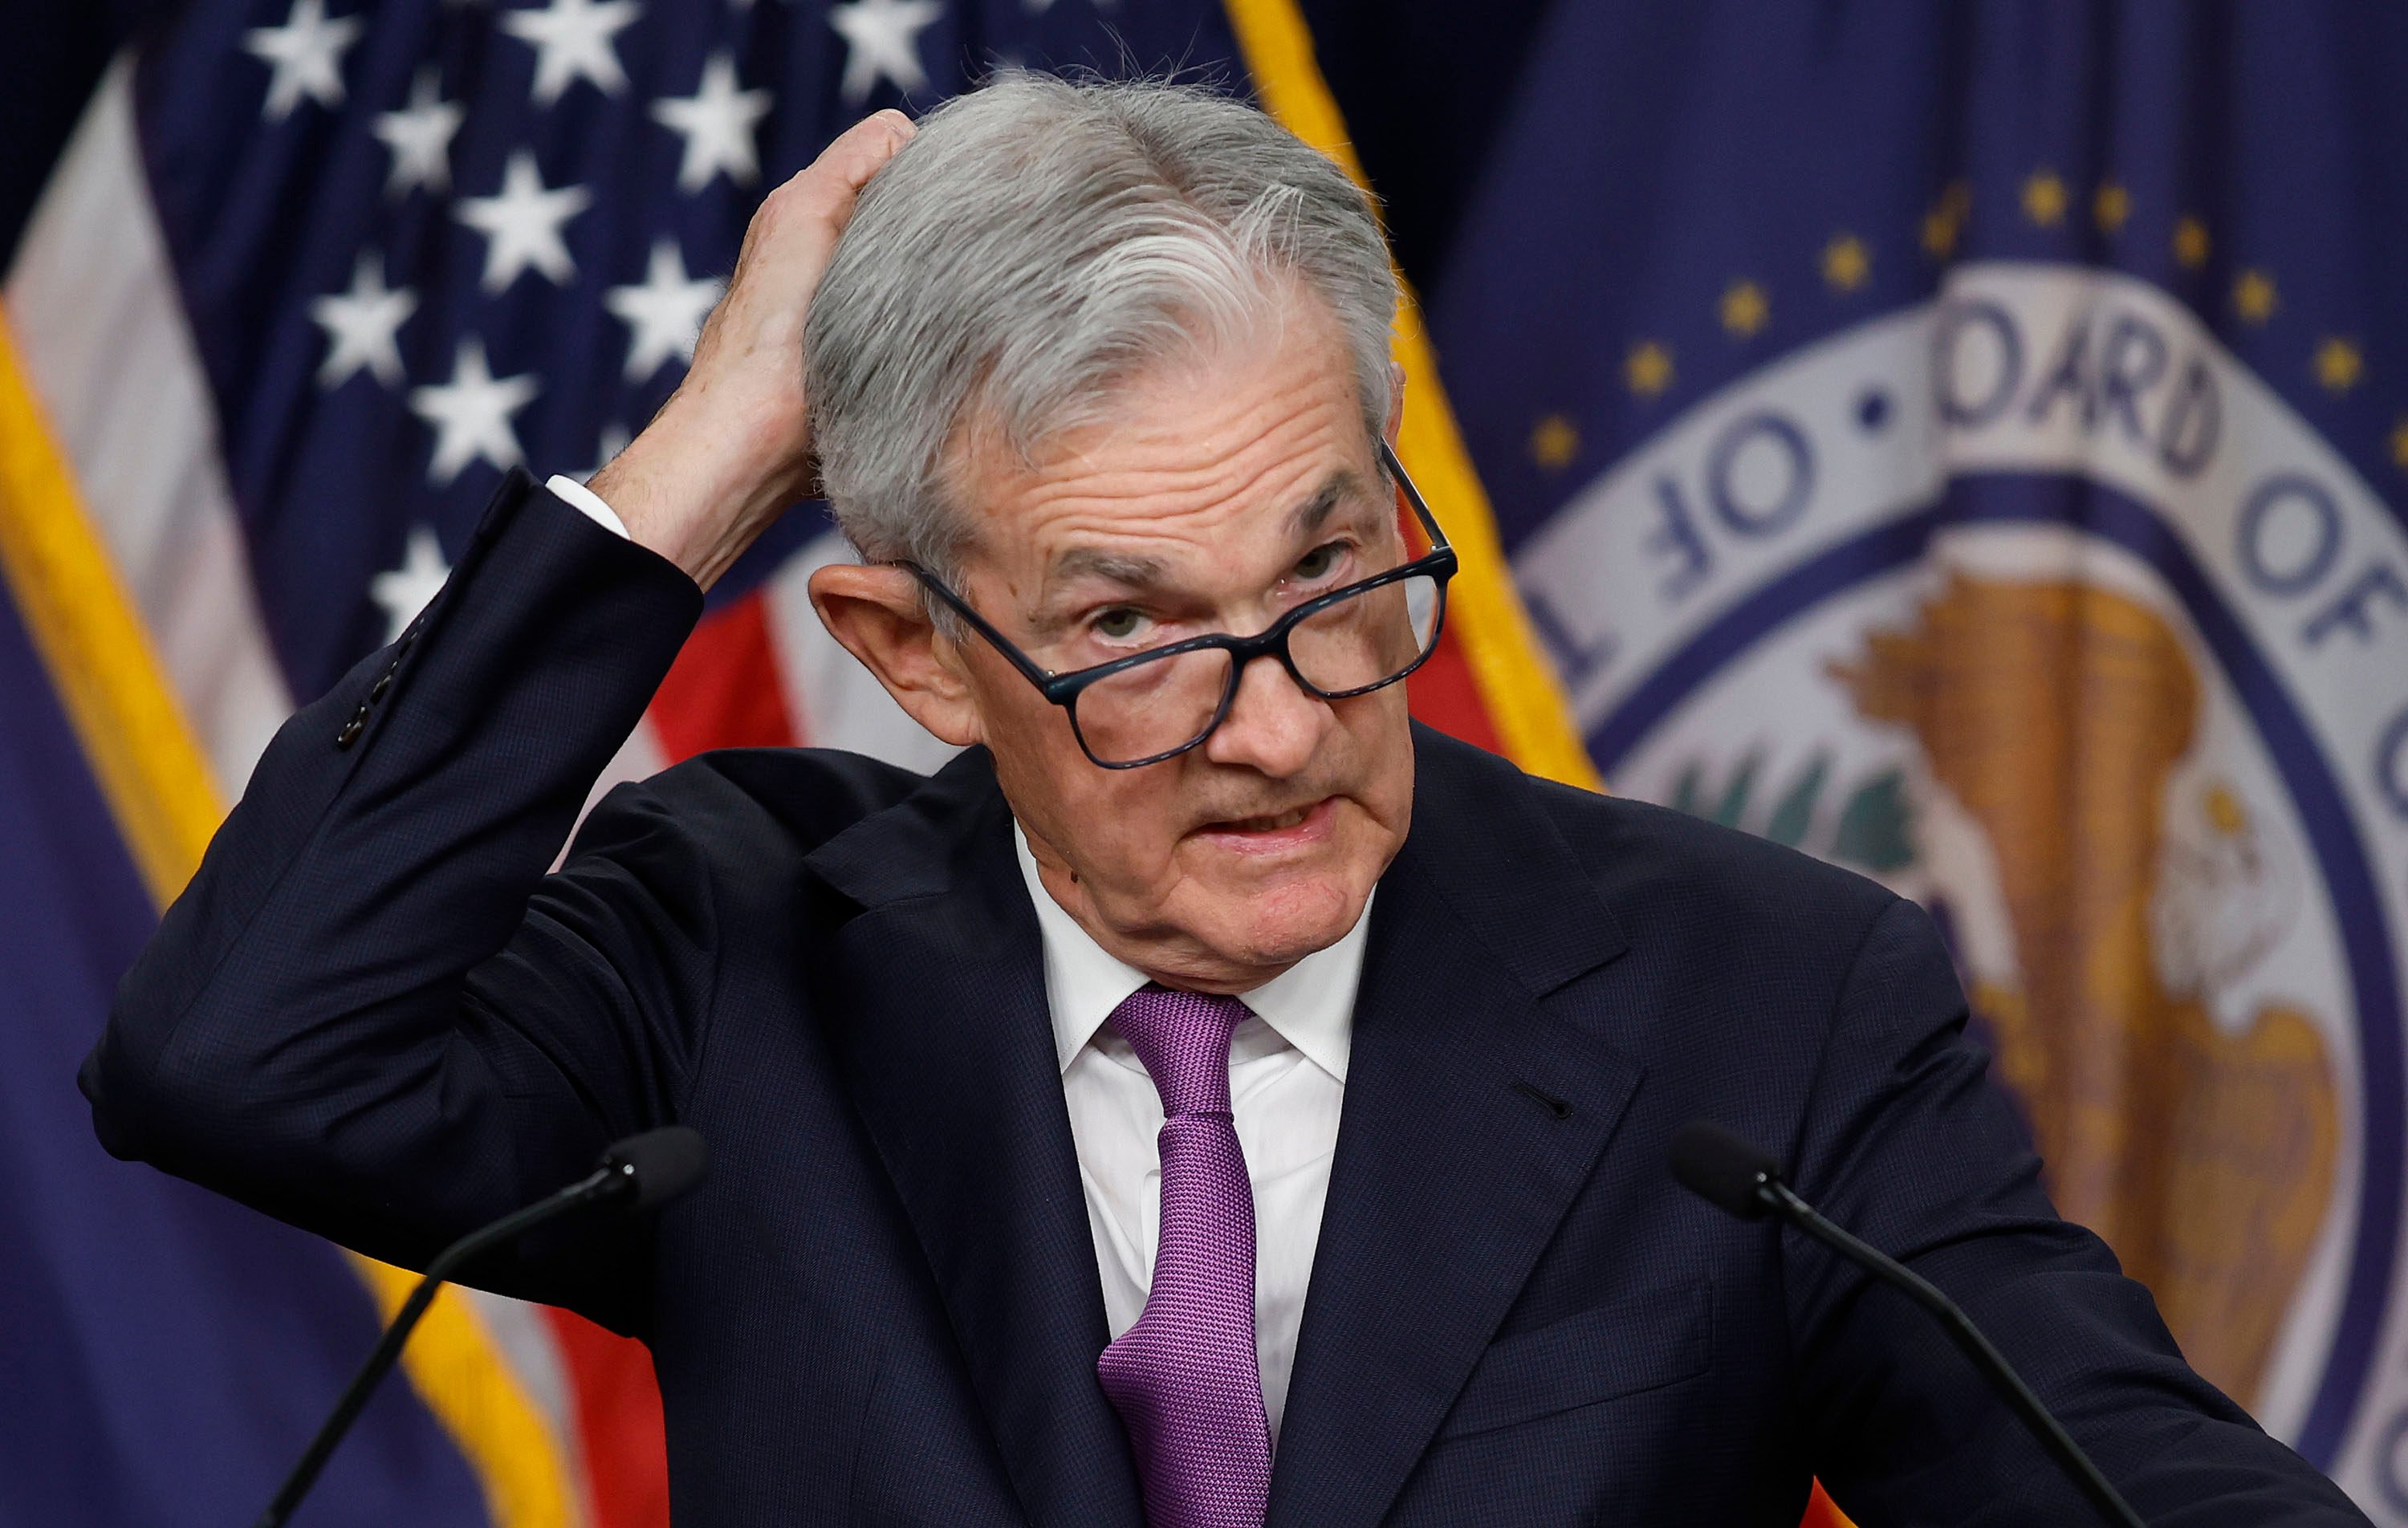 Federal Reserve Board Chairman Jerome Powell at a news conference on September 20. For those expecting a technical recession only in the US, the call was deeply and embarrassingly off target. Photo: Getty Images/TNS